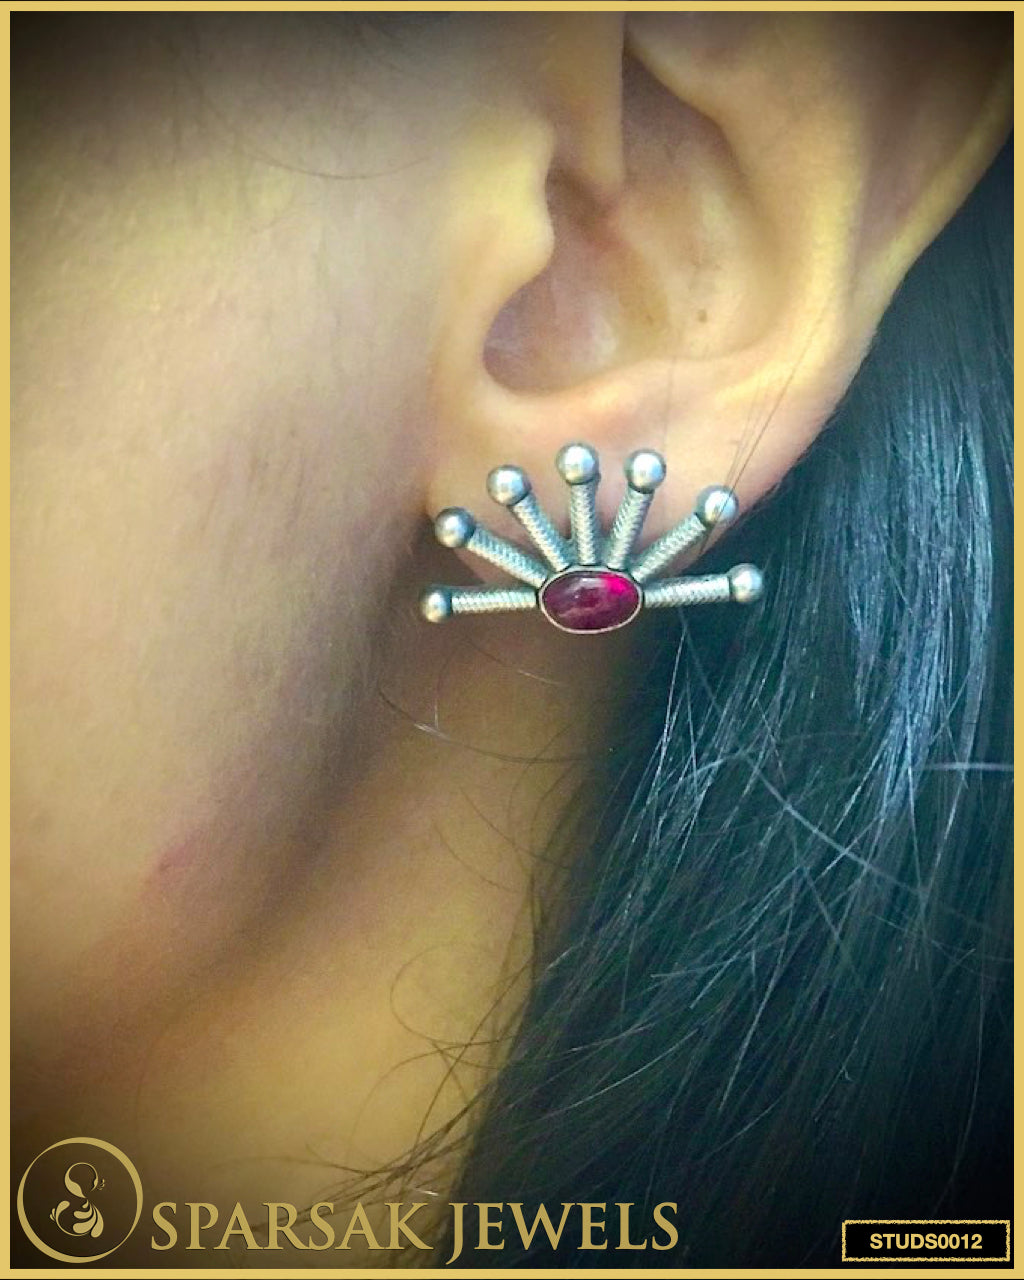 Handcrafted Temple Jewellery Silver Studs by Sparsak Jewels